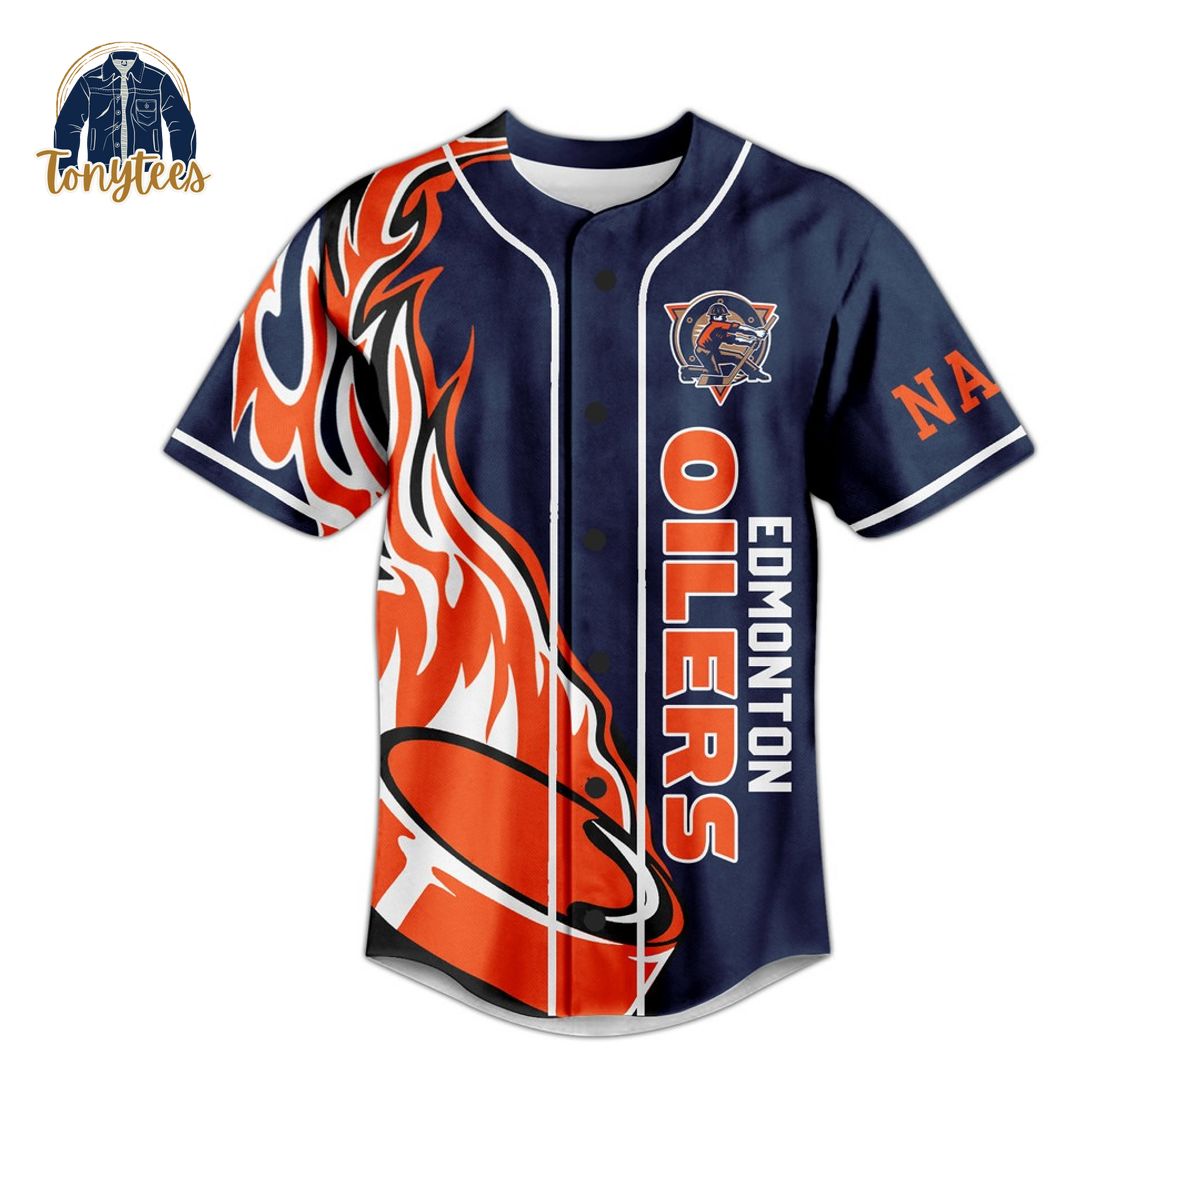 Personalized Edmonton Oilers Let’s Go Oilers Baseball Jersey